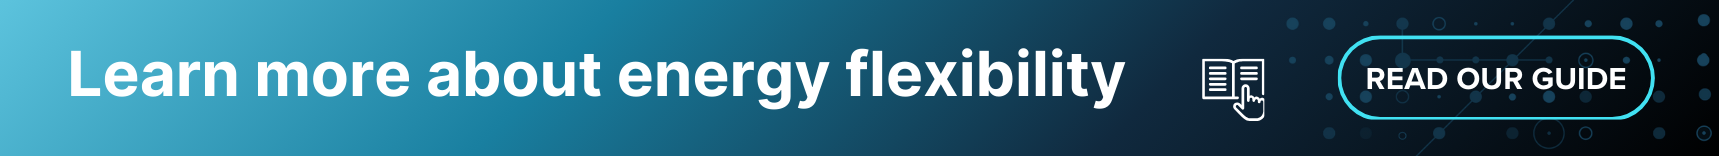 A guide to flexibility markets